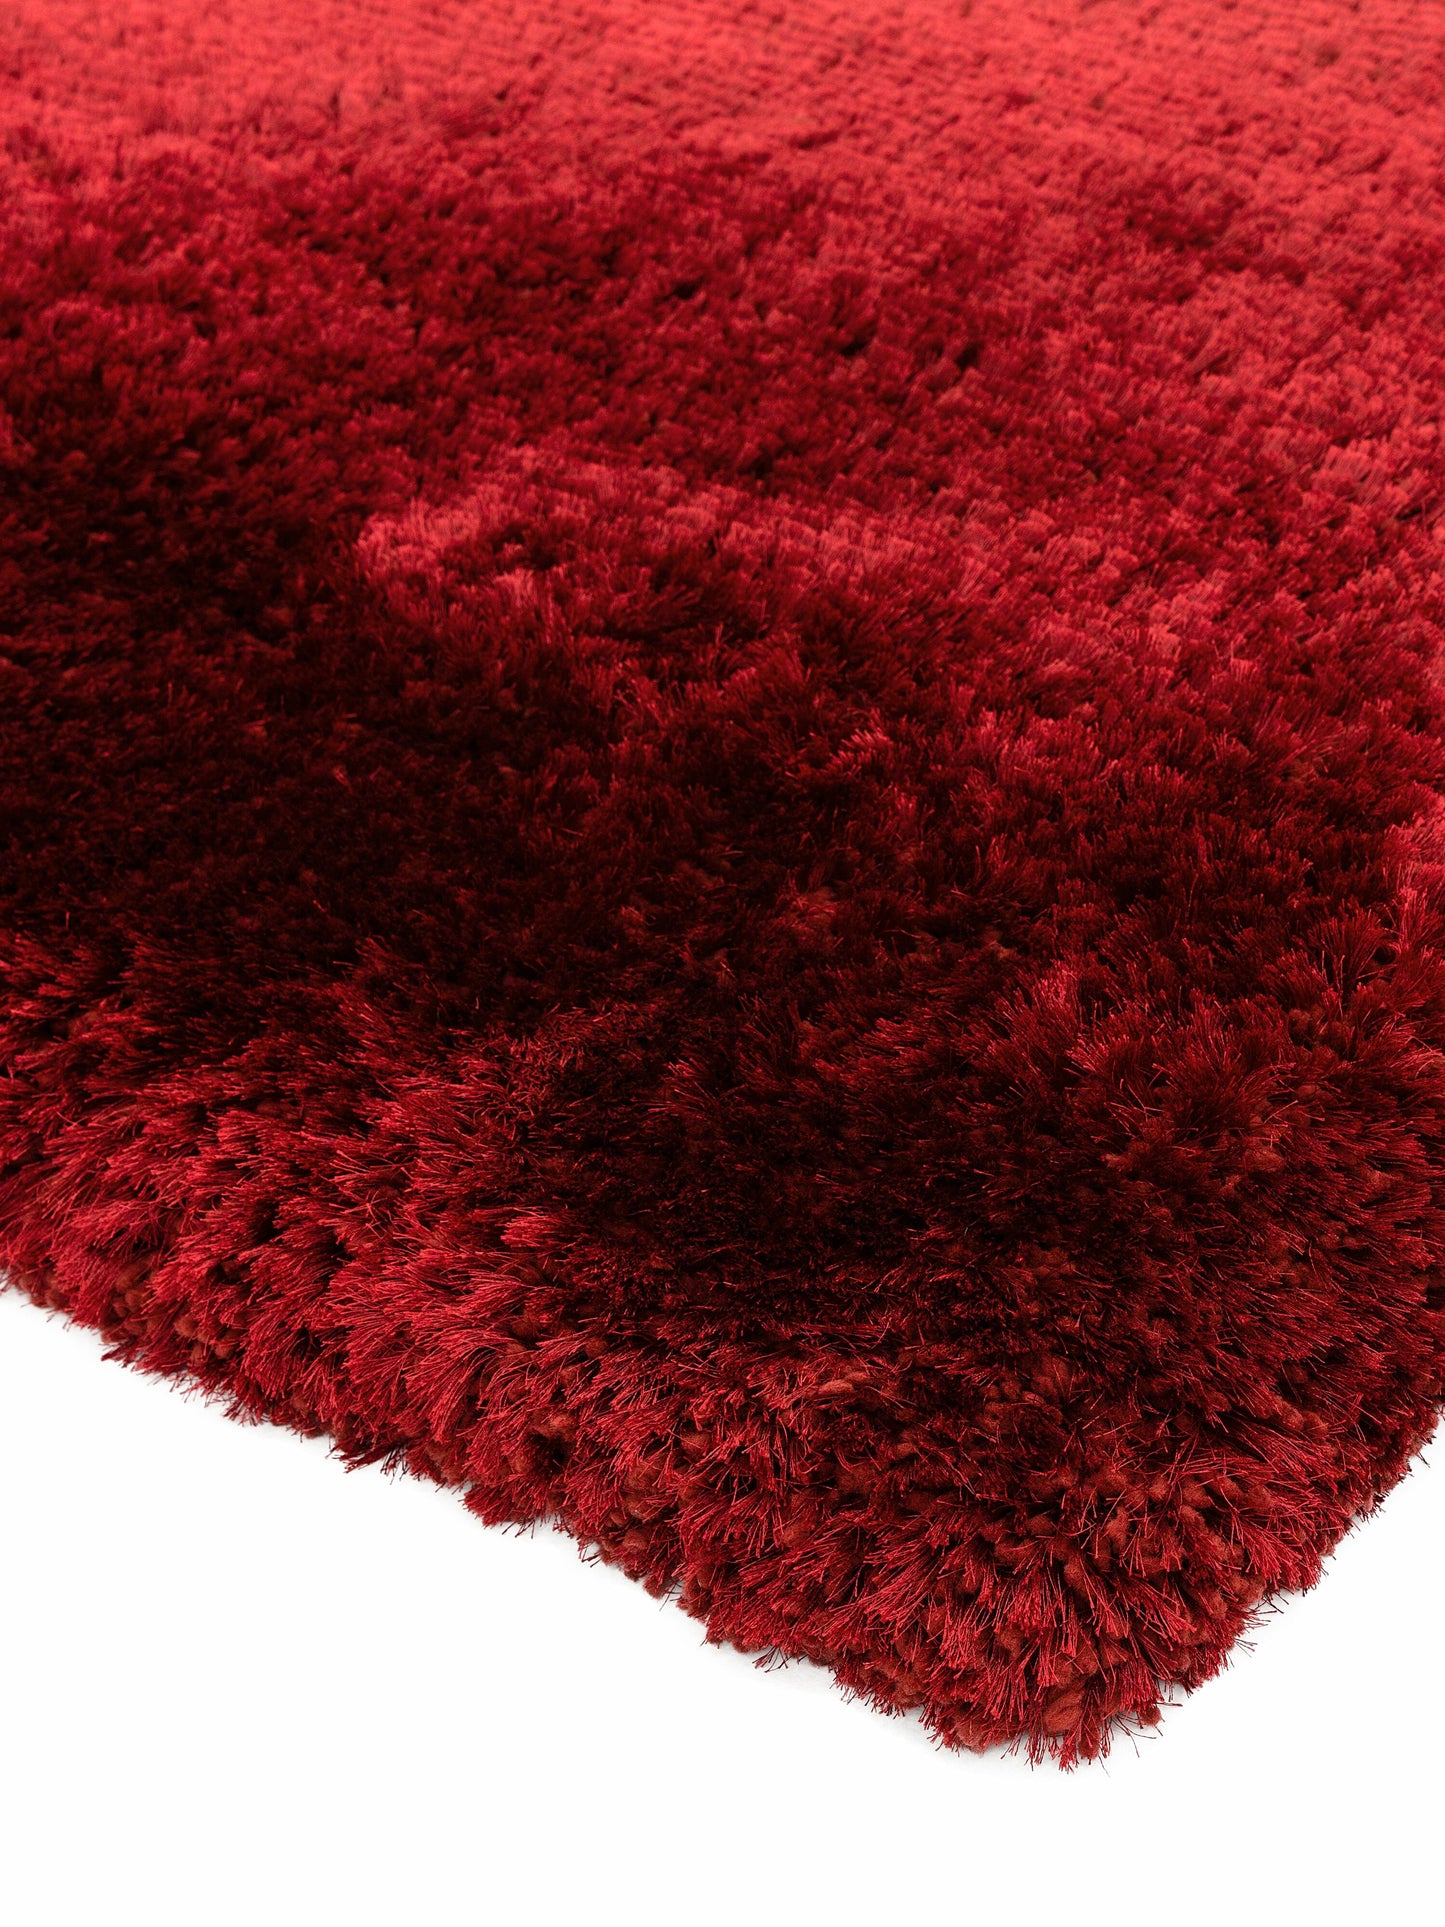 Asiatic Carpets Plush Hand Woven Rug Red - 160 x 230cm